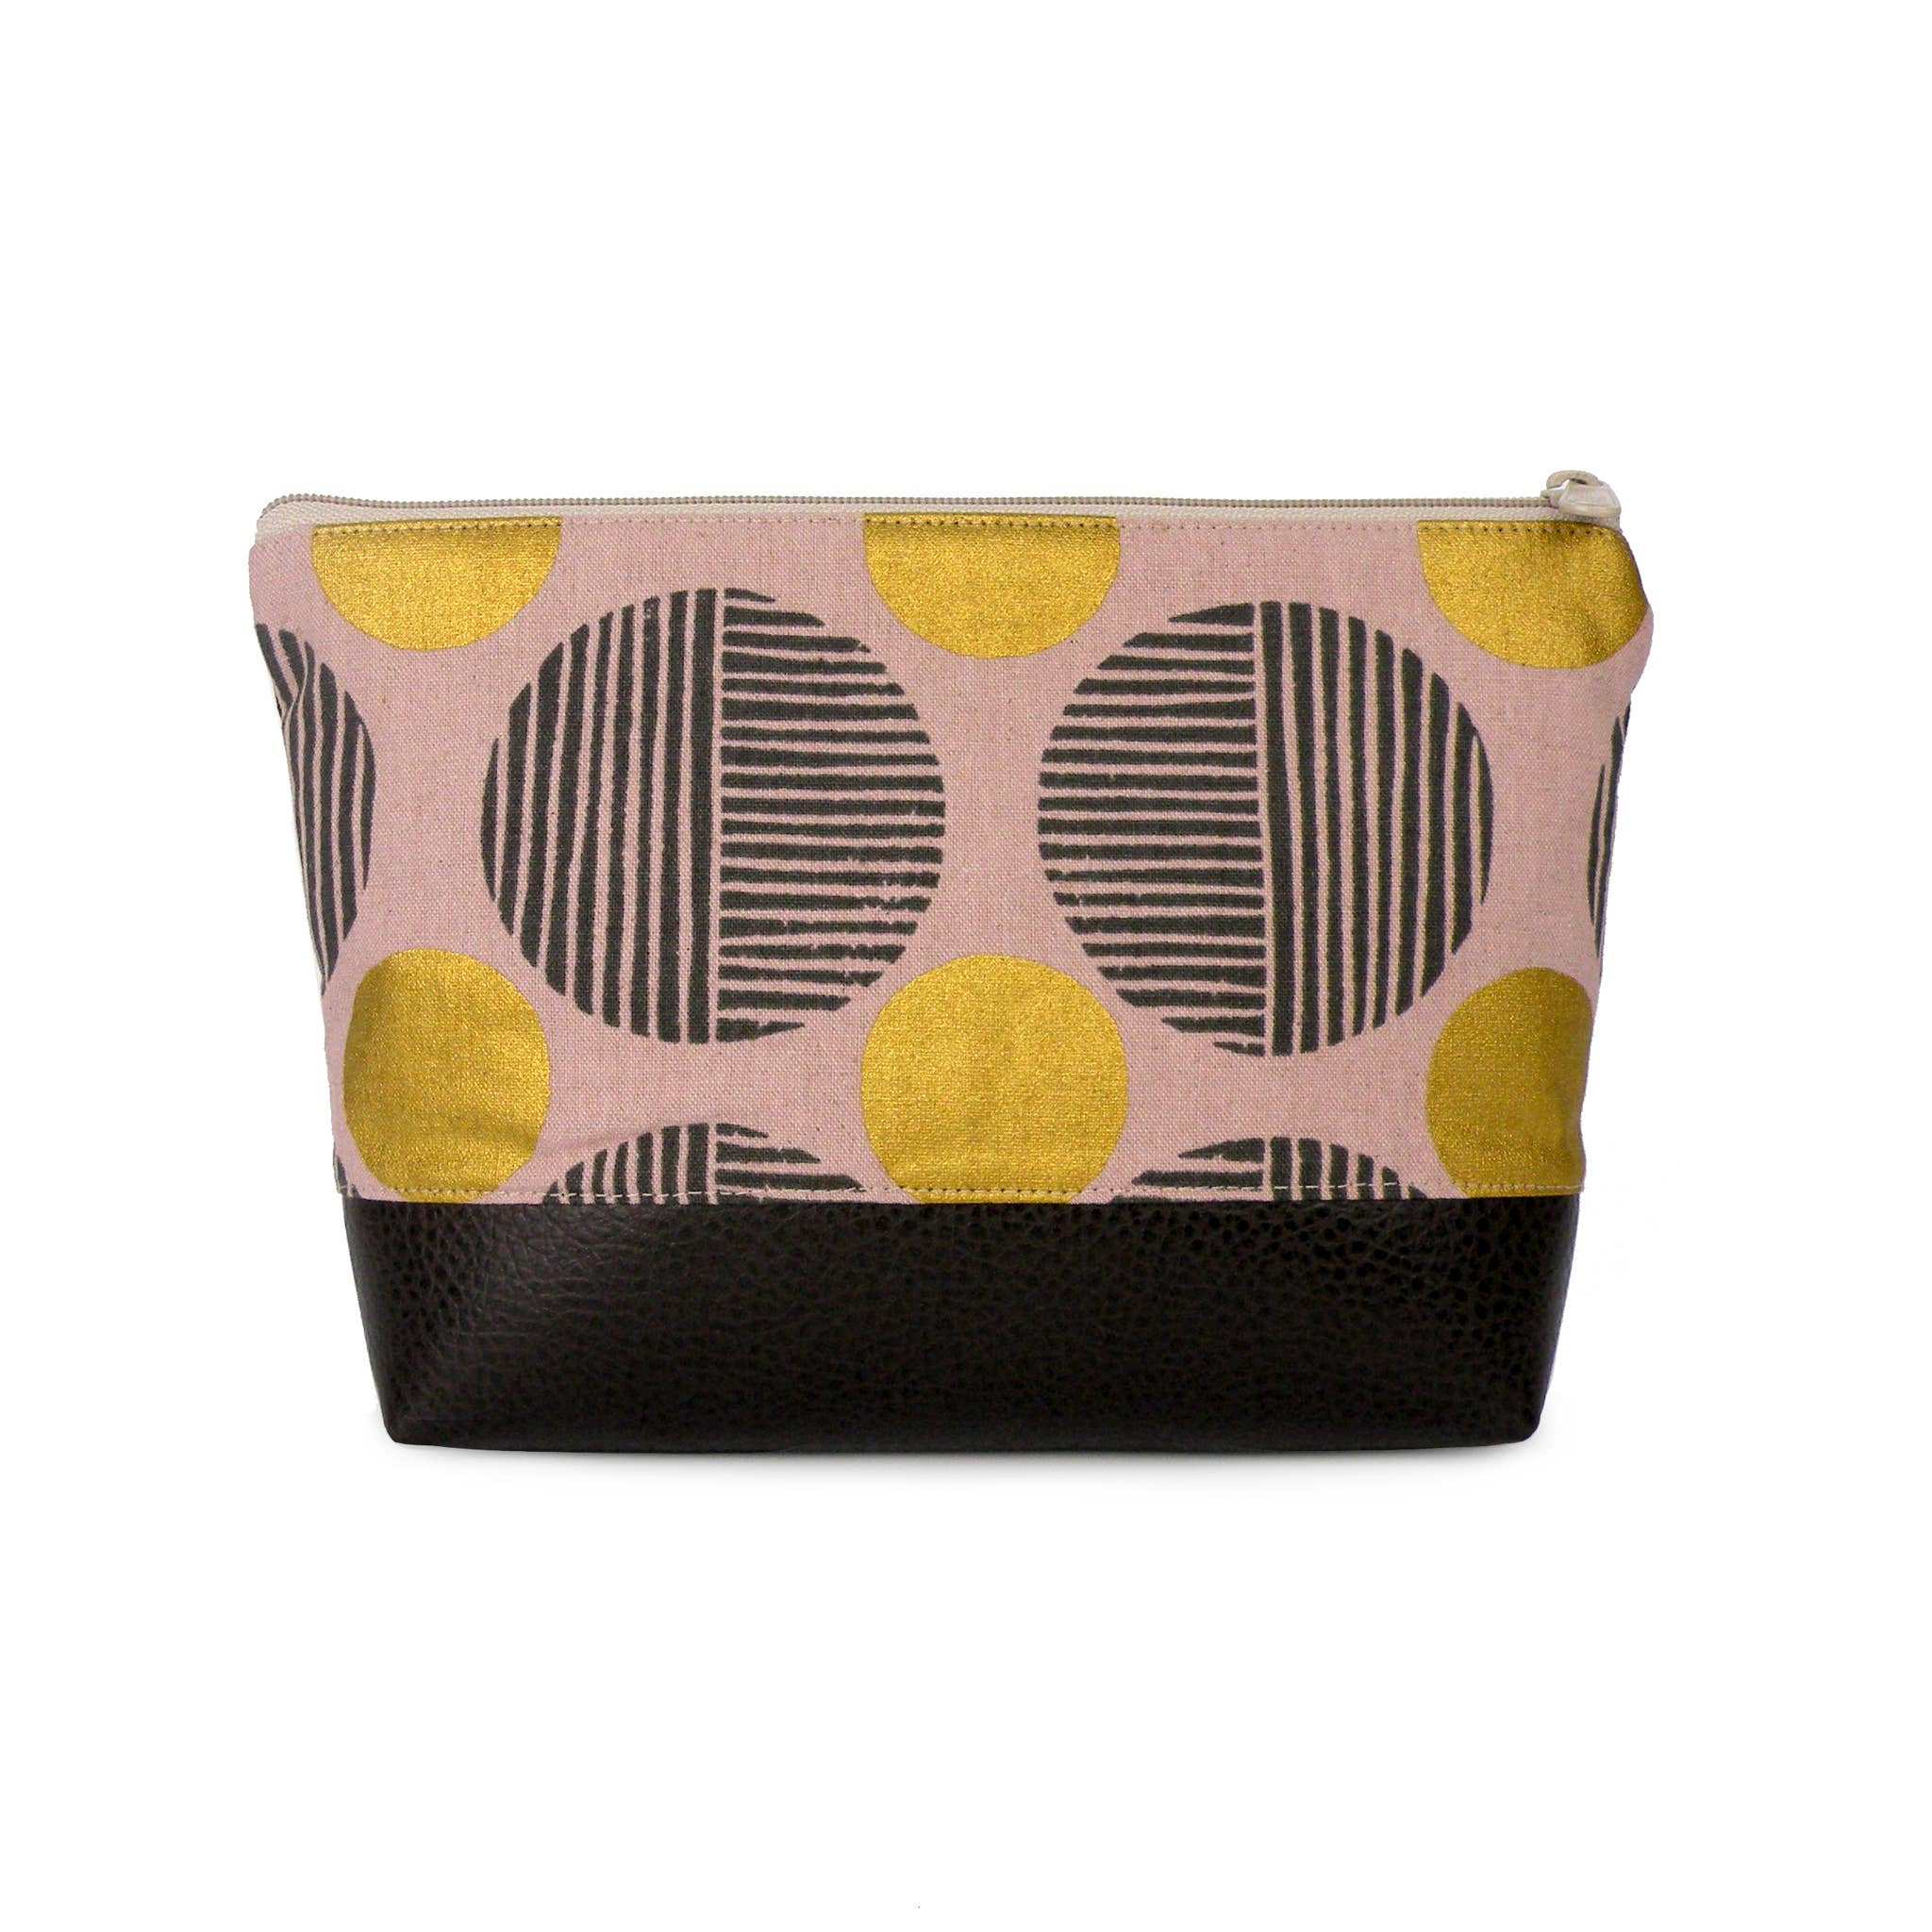 Large Cosmetic Clutch in Pink & Gold